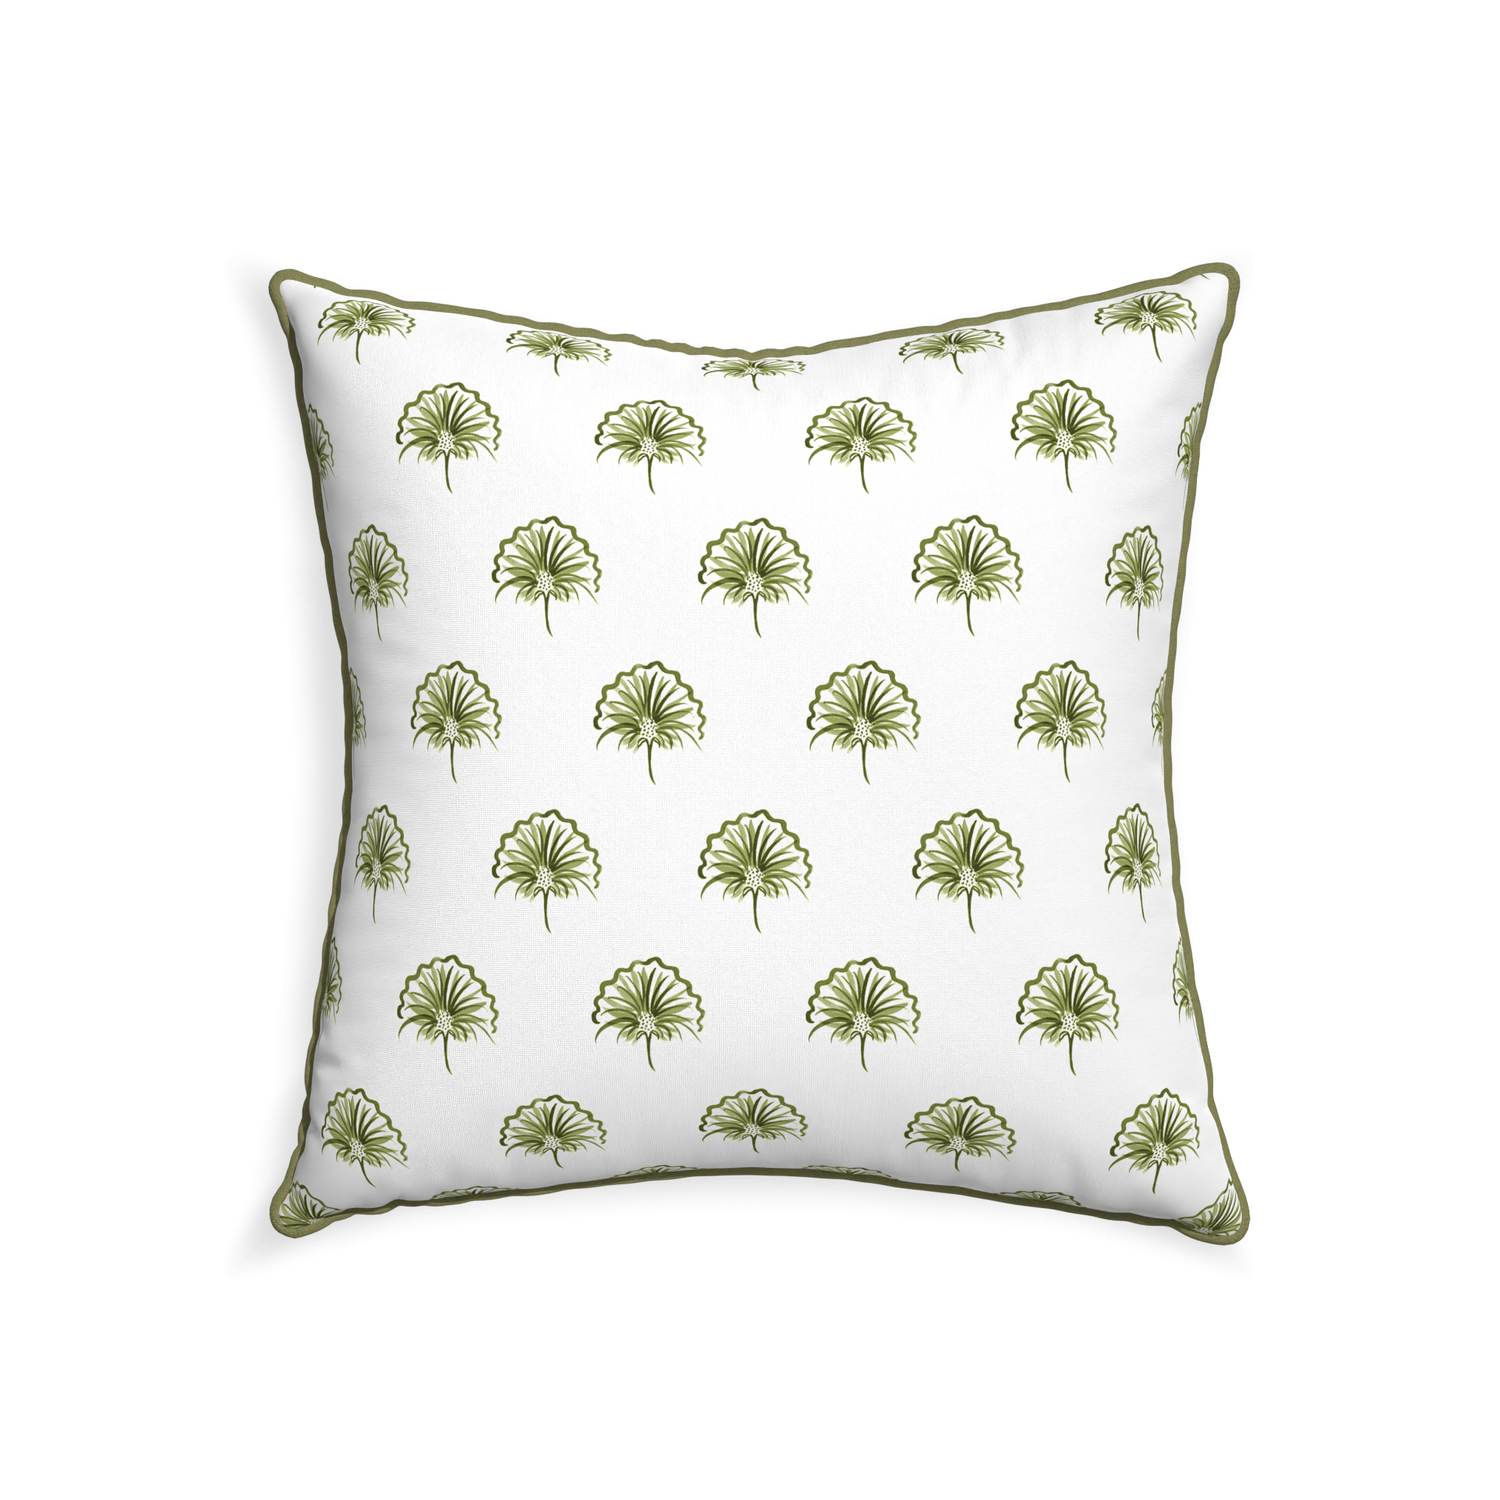 22-square penelope moss custom green floralpillow with moss piping on white background